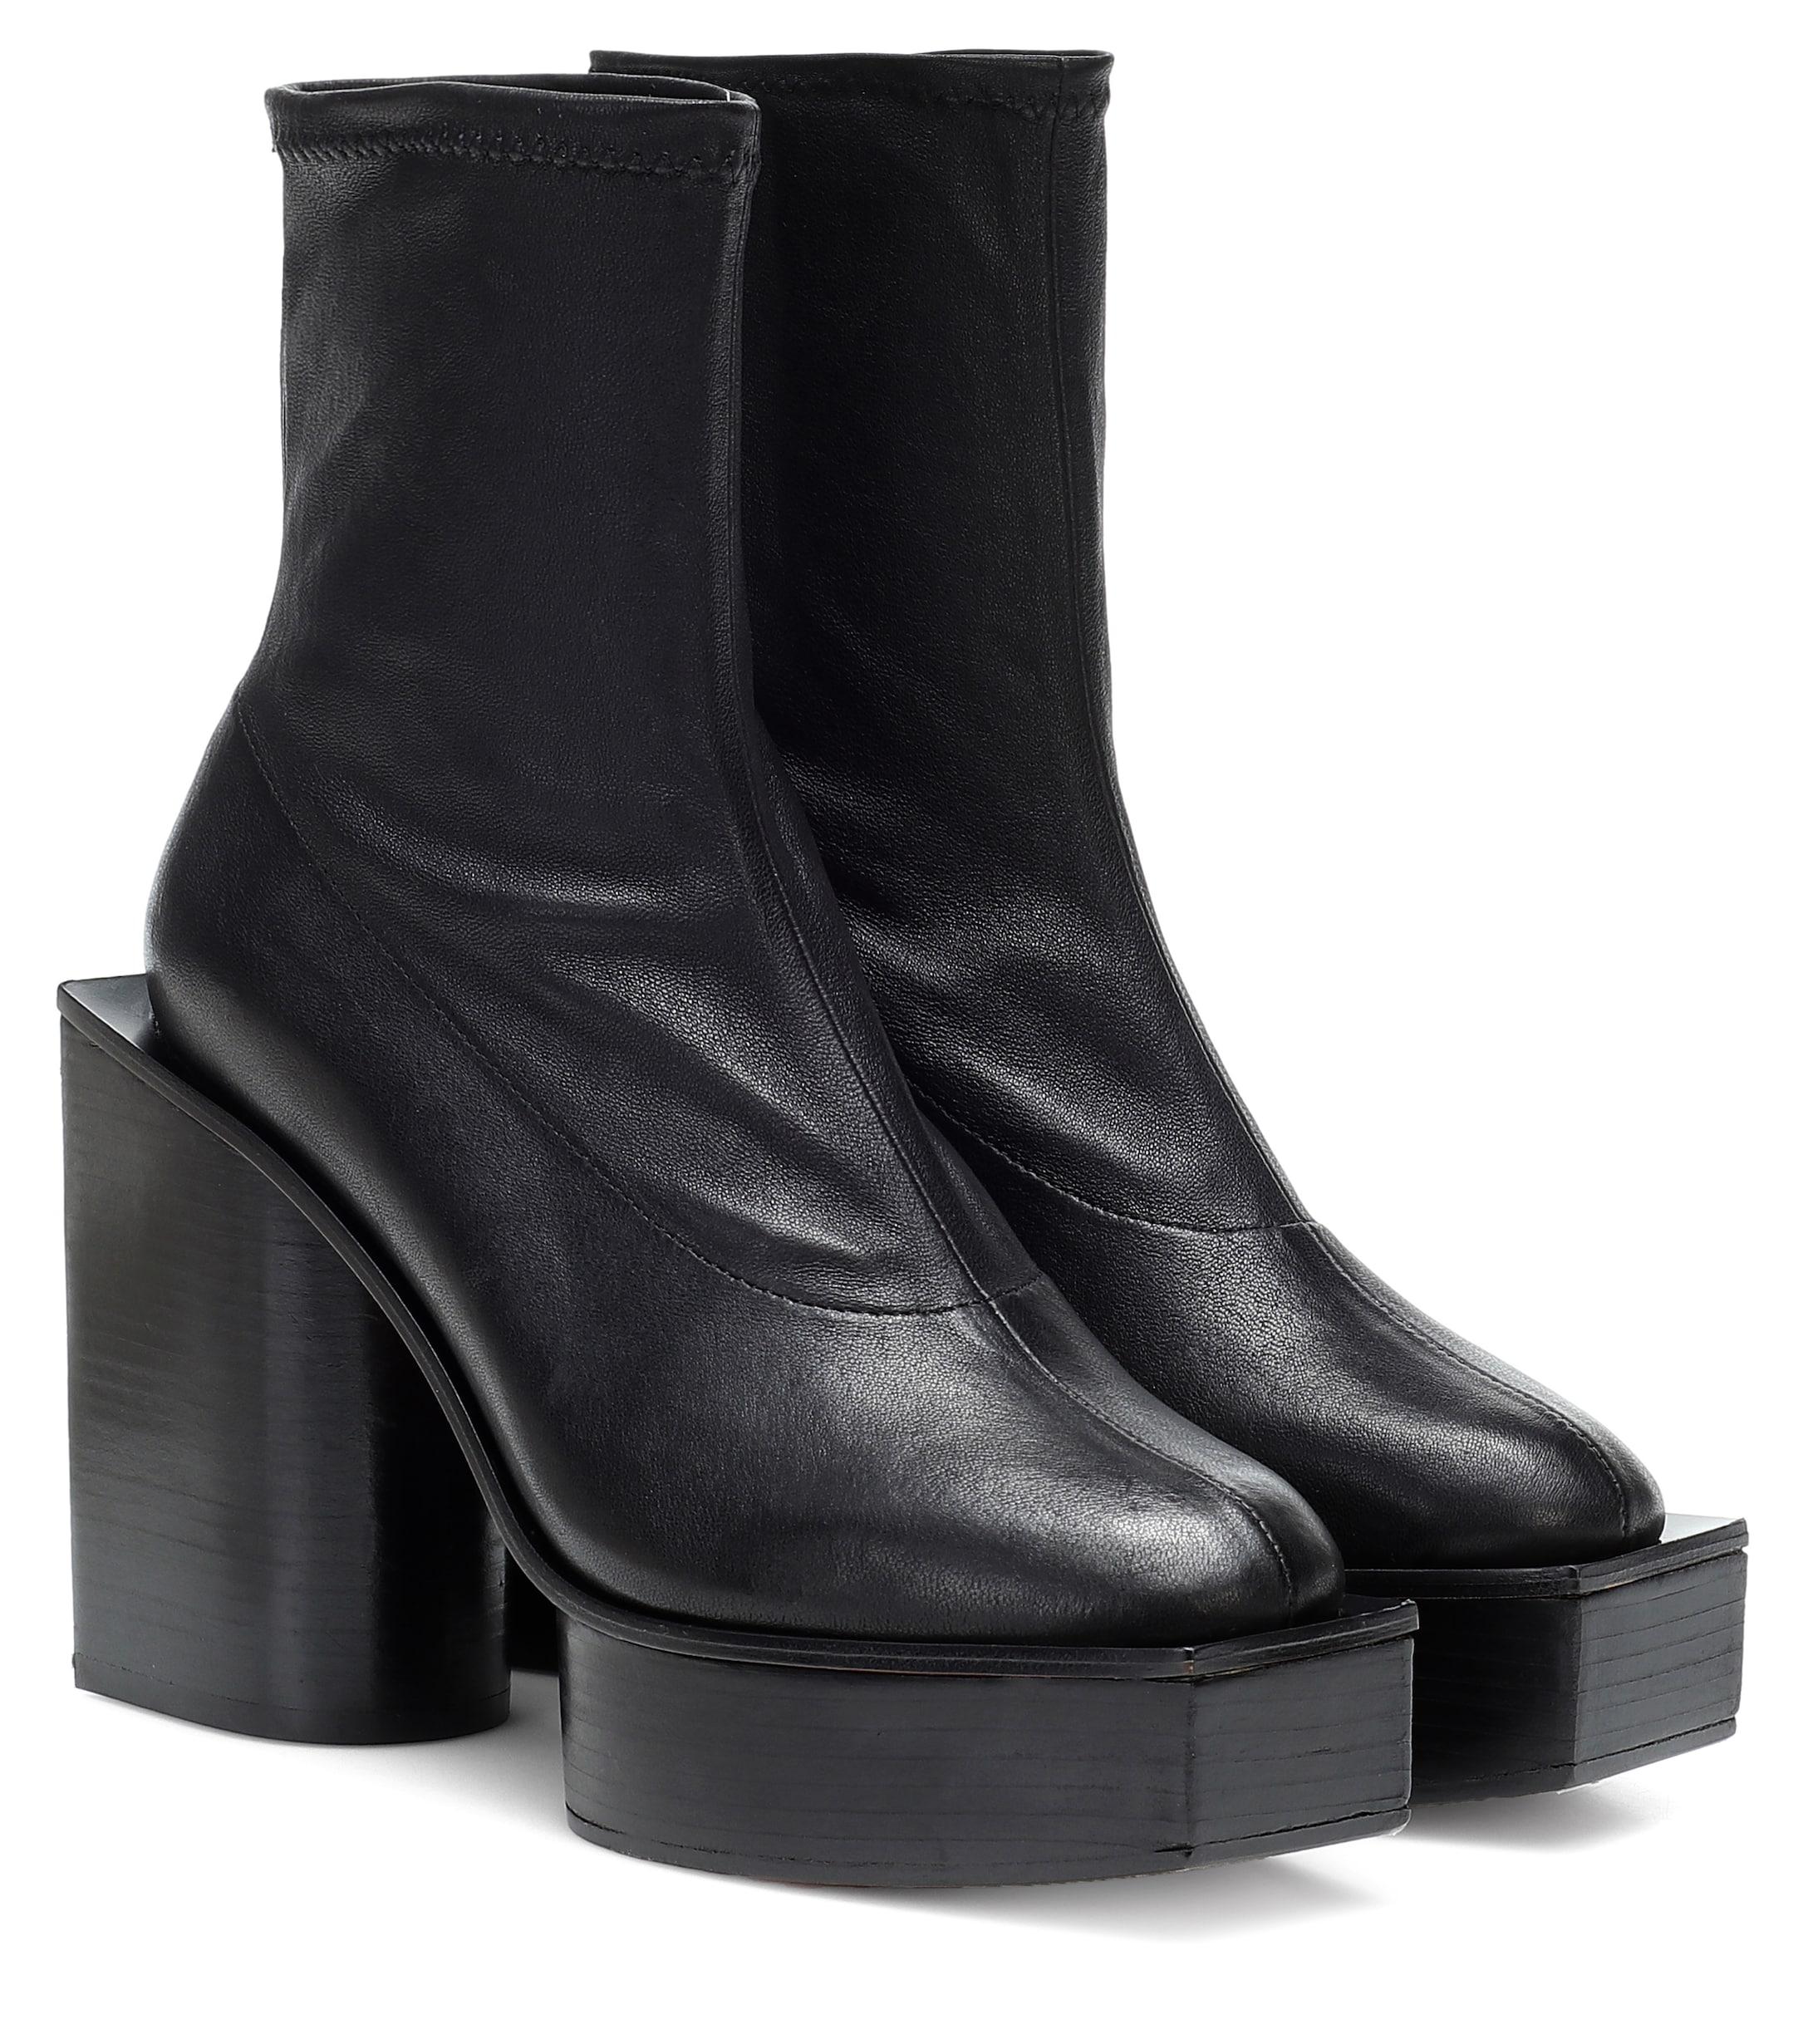 Clergerie Bonnie Leather Ankle Boots in Black - Lyst